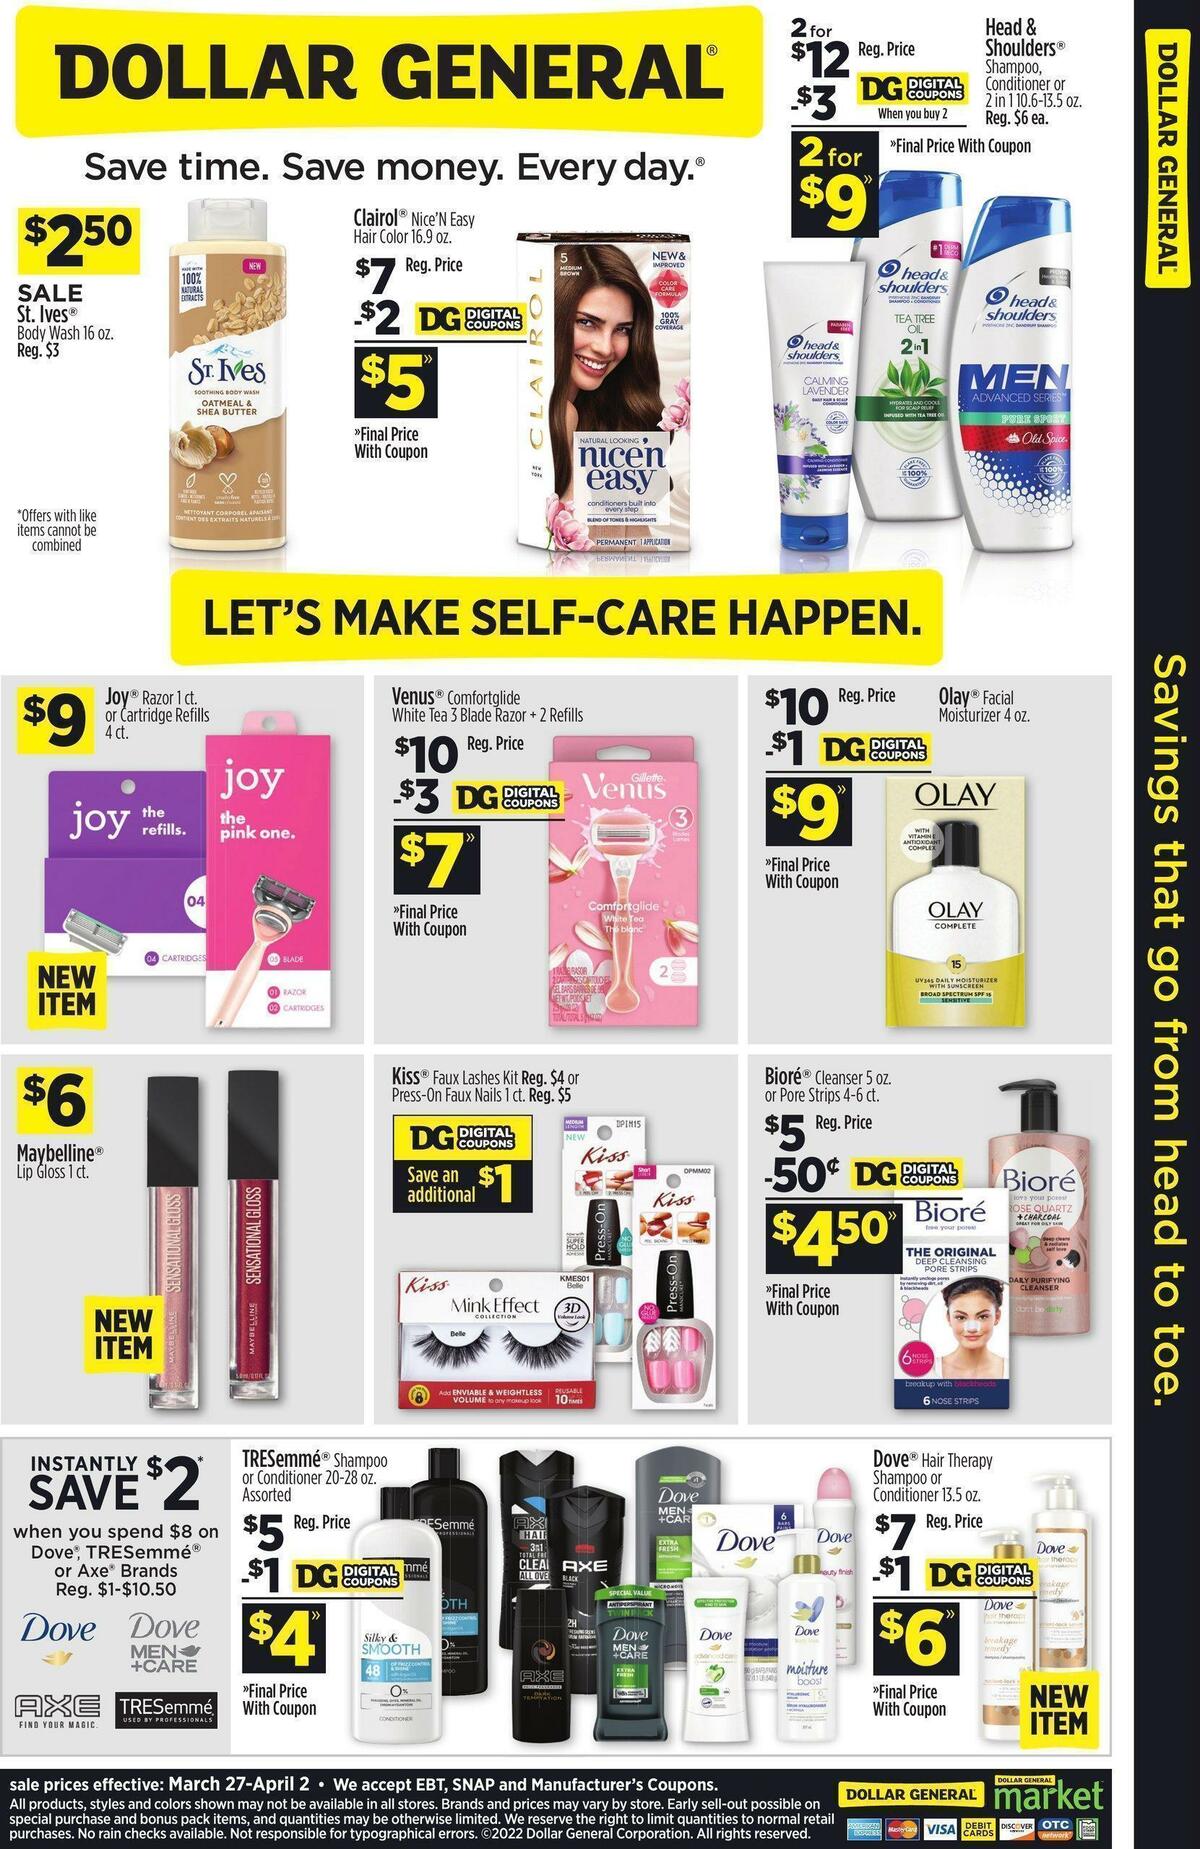 Dollar General Health and Beauty Deals Weekly Ad from March 27